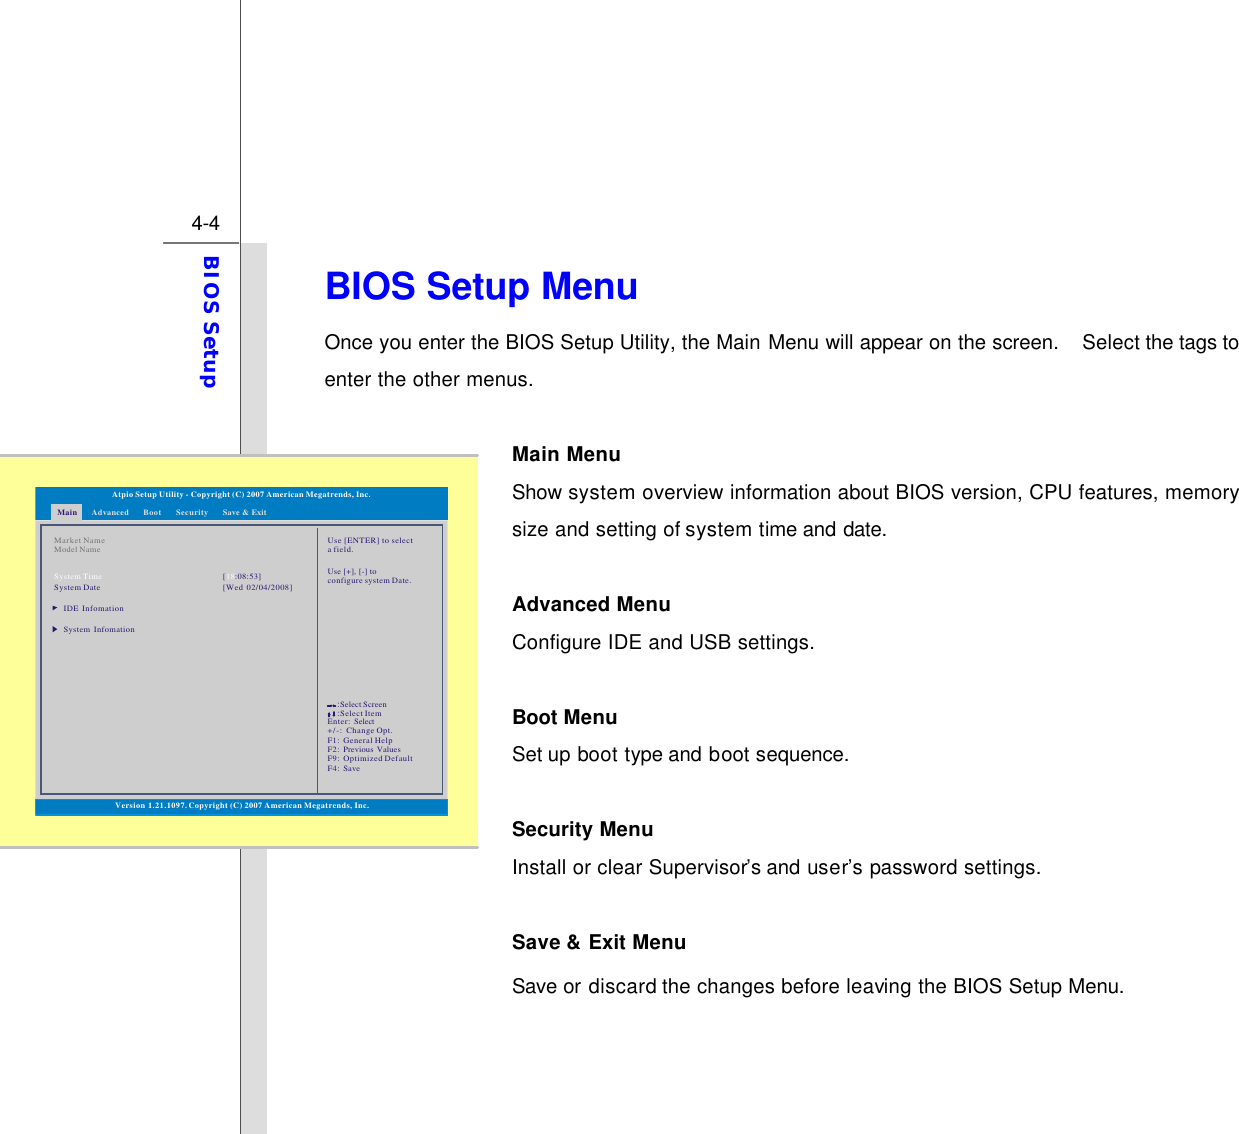  4-4 BIOS Setup  BIOS Setup Menu Once you enter the BIOS Setup Utility, the Main Menu will appear on the screen.  Select the tags to enter the other menus.    Main Menu   Show system overview information about BIOS version, CPU features, memory size and setting of system time and date.  Advanced Menu Configure IDE and USB settings.  Boot Menu   Set up boot type and boot sequence.  Security Menu   Install or clear Supervisor’s and user’s password settings.  Save &amp; Exit Menu   Save or discard the changes before leaving the BIOS Setup Menu.    Main Advanced SecurityBoot Save &amp; ExitVersion 1.21.1097. Copyright (C) 2007 American Megatrends, Inc.Market NameModel NameSystem TimeSystem DateIDE InfomationSystem Infomation[:08:53]18[Wed 02/04/2008]Use [ENTER] to selecta field.Use [+], [-] to configure system Date.Atpio Setup Utility - Copyright (C) 2007 American Megatrends, Inc.Enter: +/-: F1: F2: F9: F4: SelectChange Opt.General HelpPrevious ValuesOptimized DefaultSave::Select ScreenSelect Item